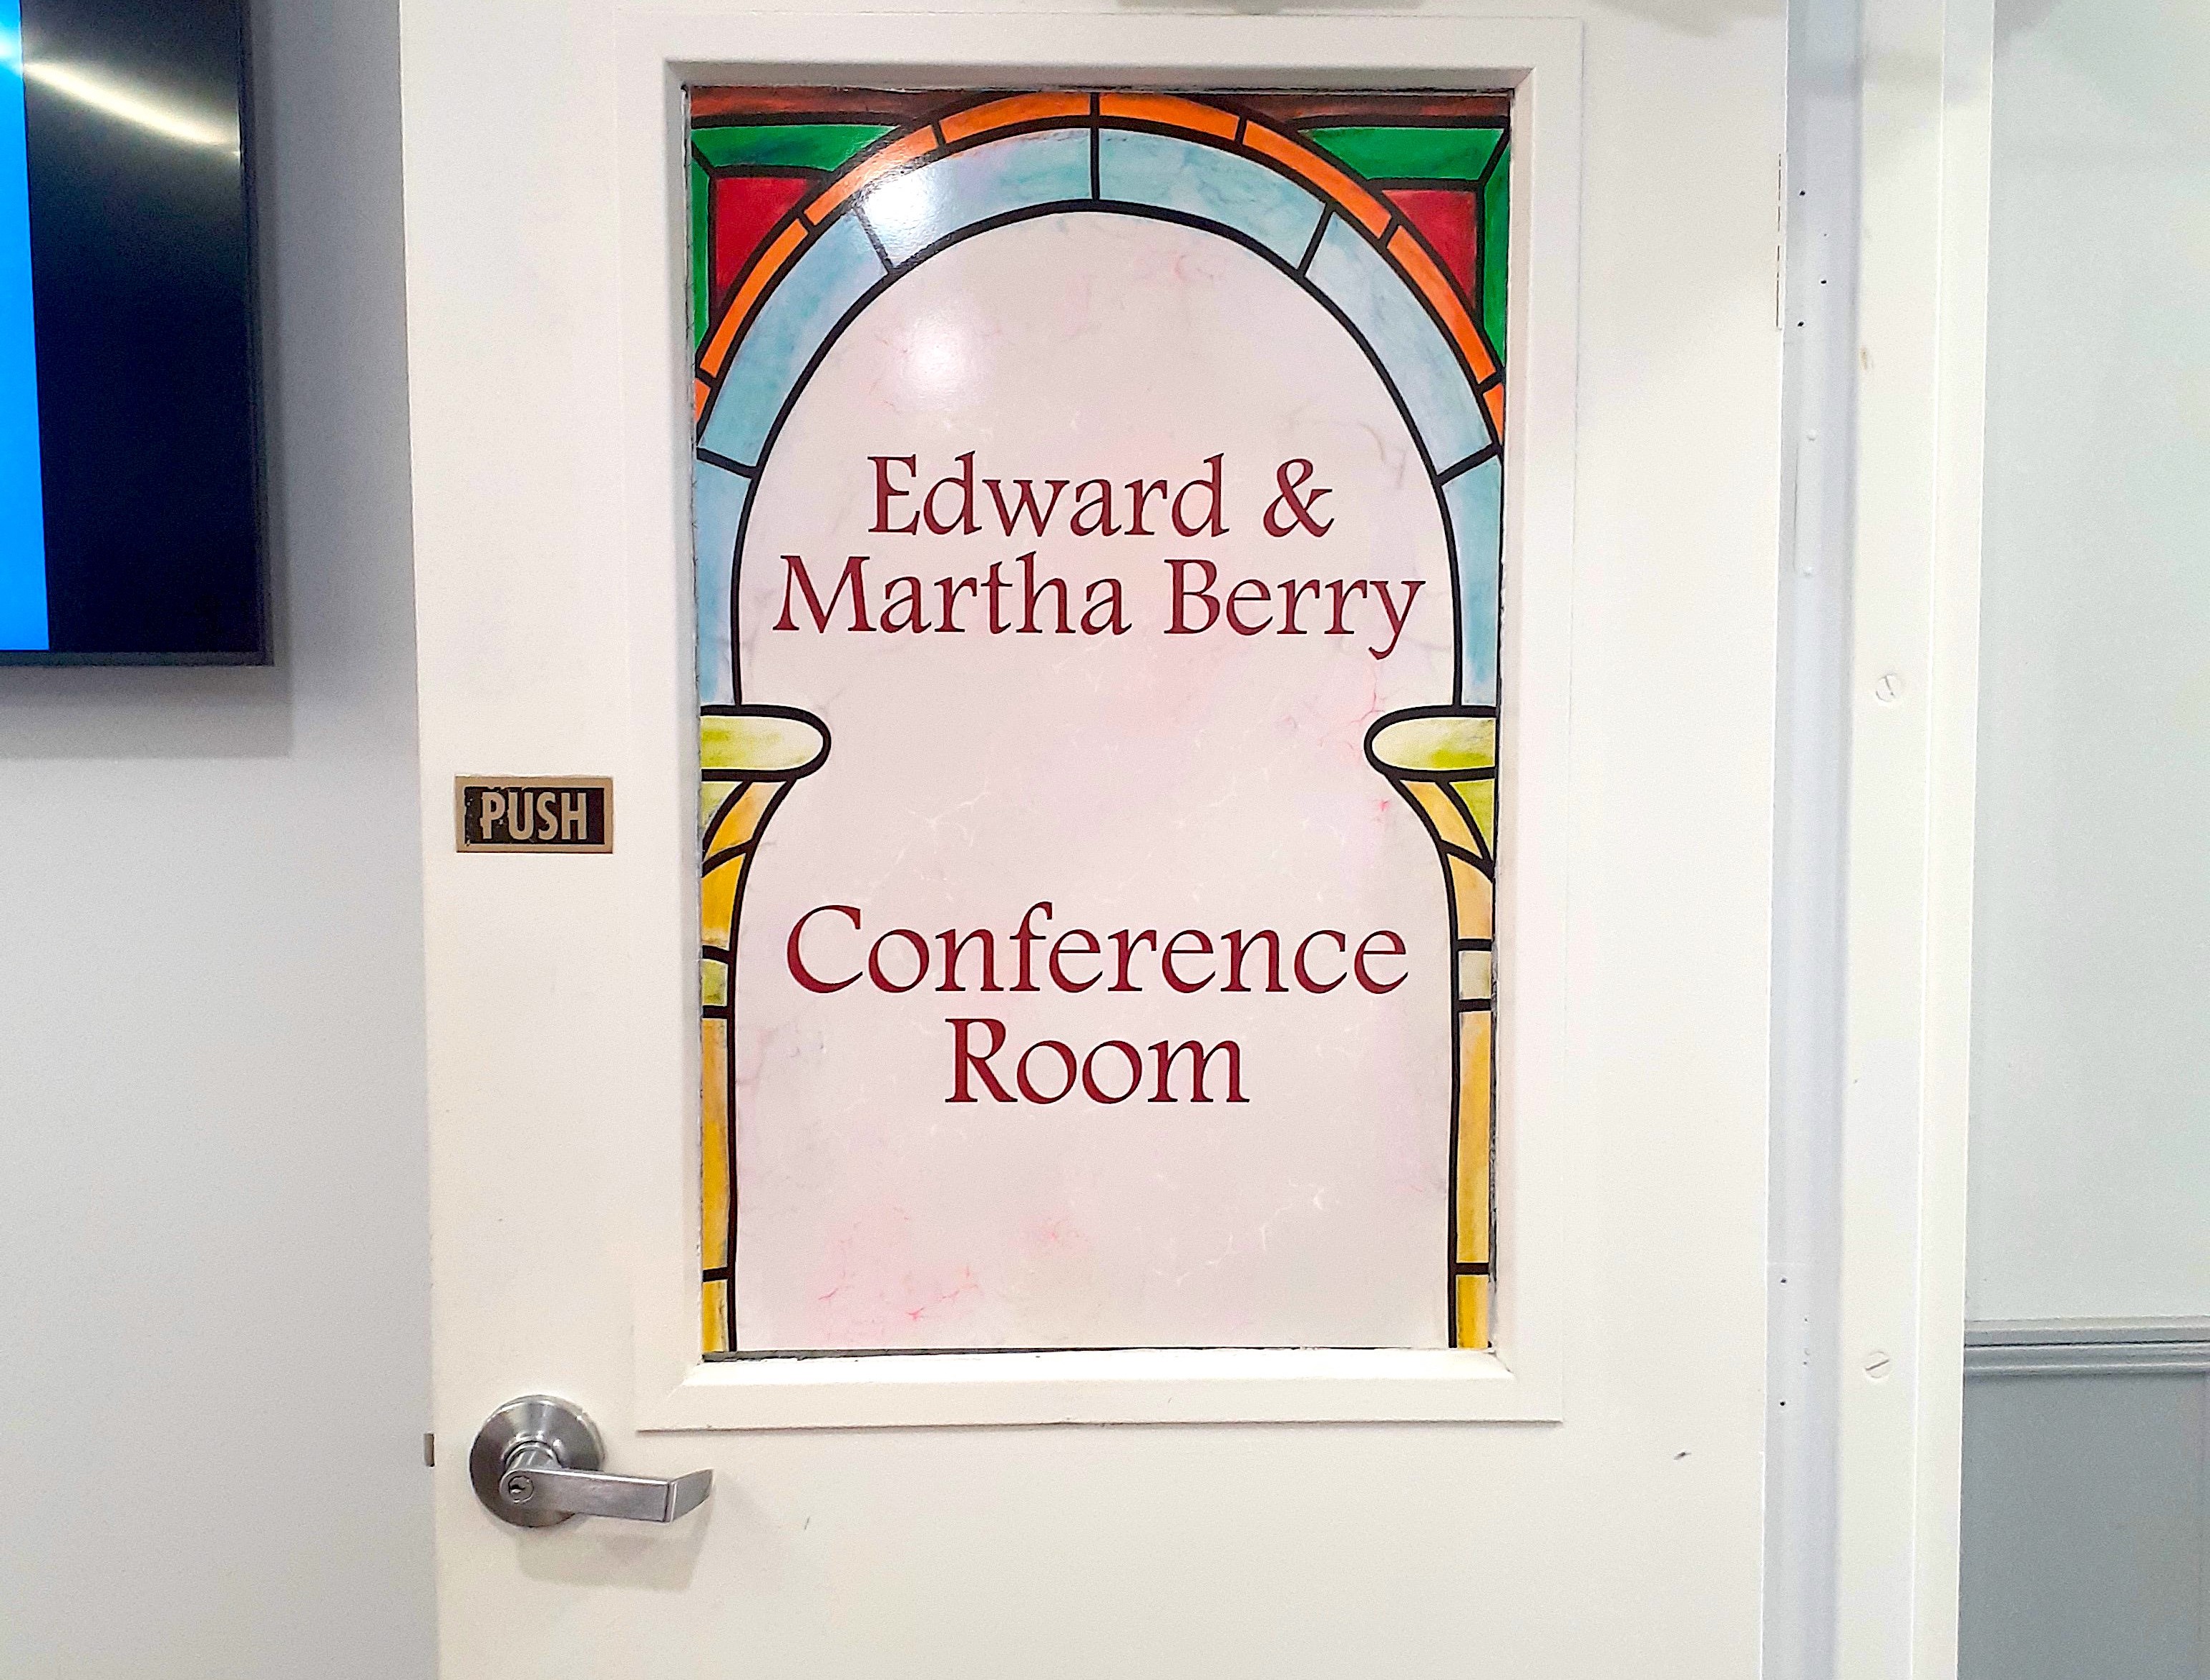 The Edward and Martha Berry Conference Room located in the Athens City Building 